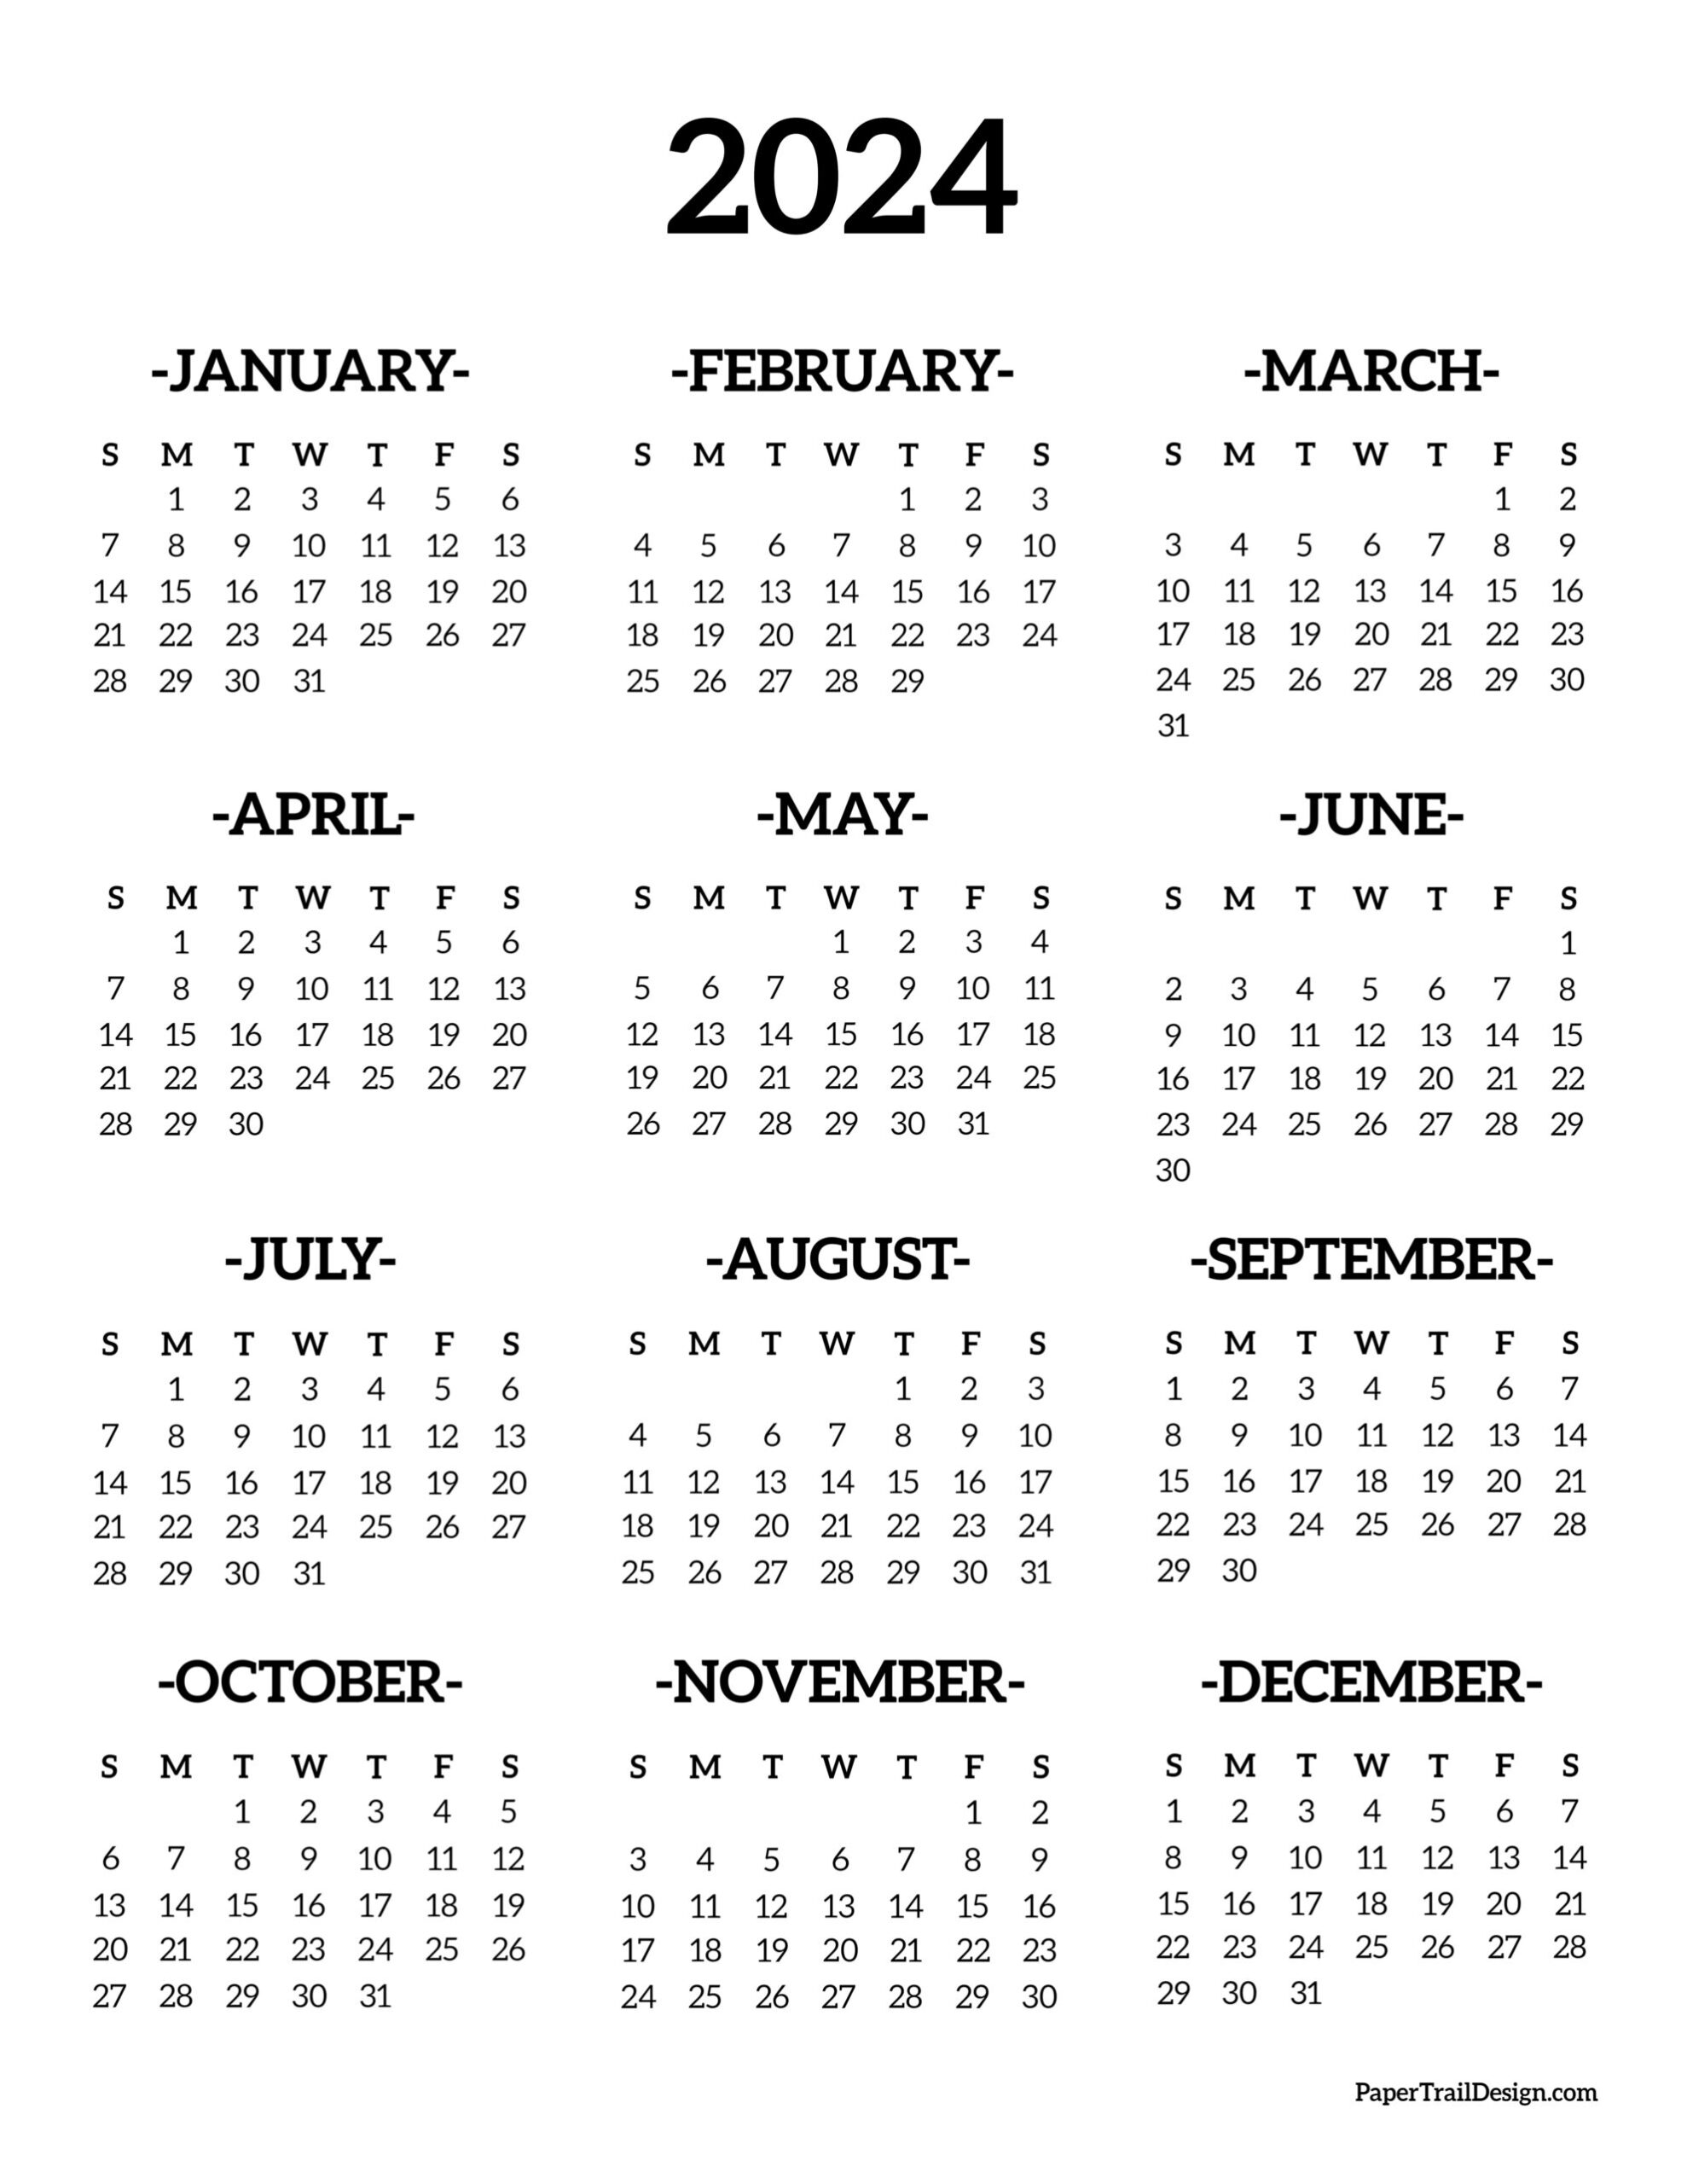 Calendar 2024 Printable One Page - Paper Trail Design for 2024 Wall Calendar Printable Free